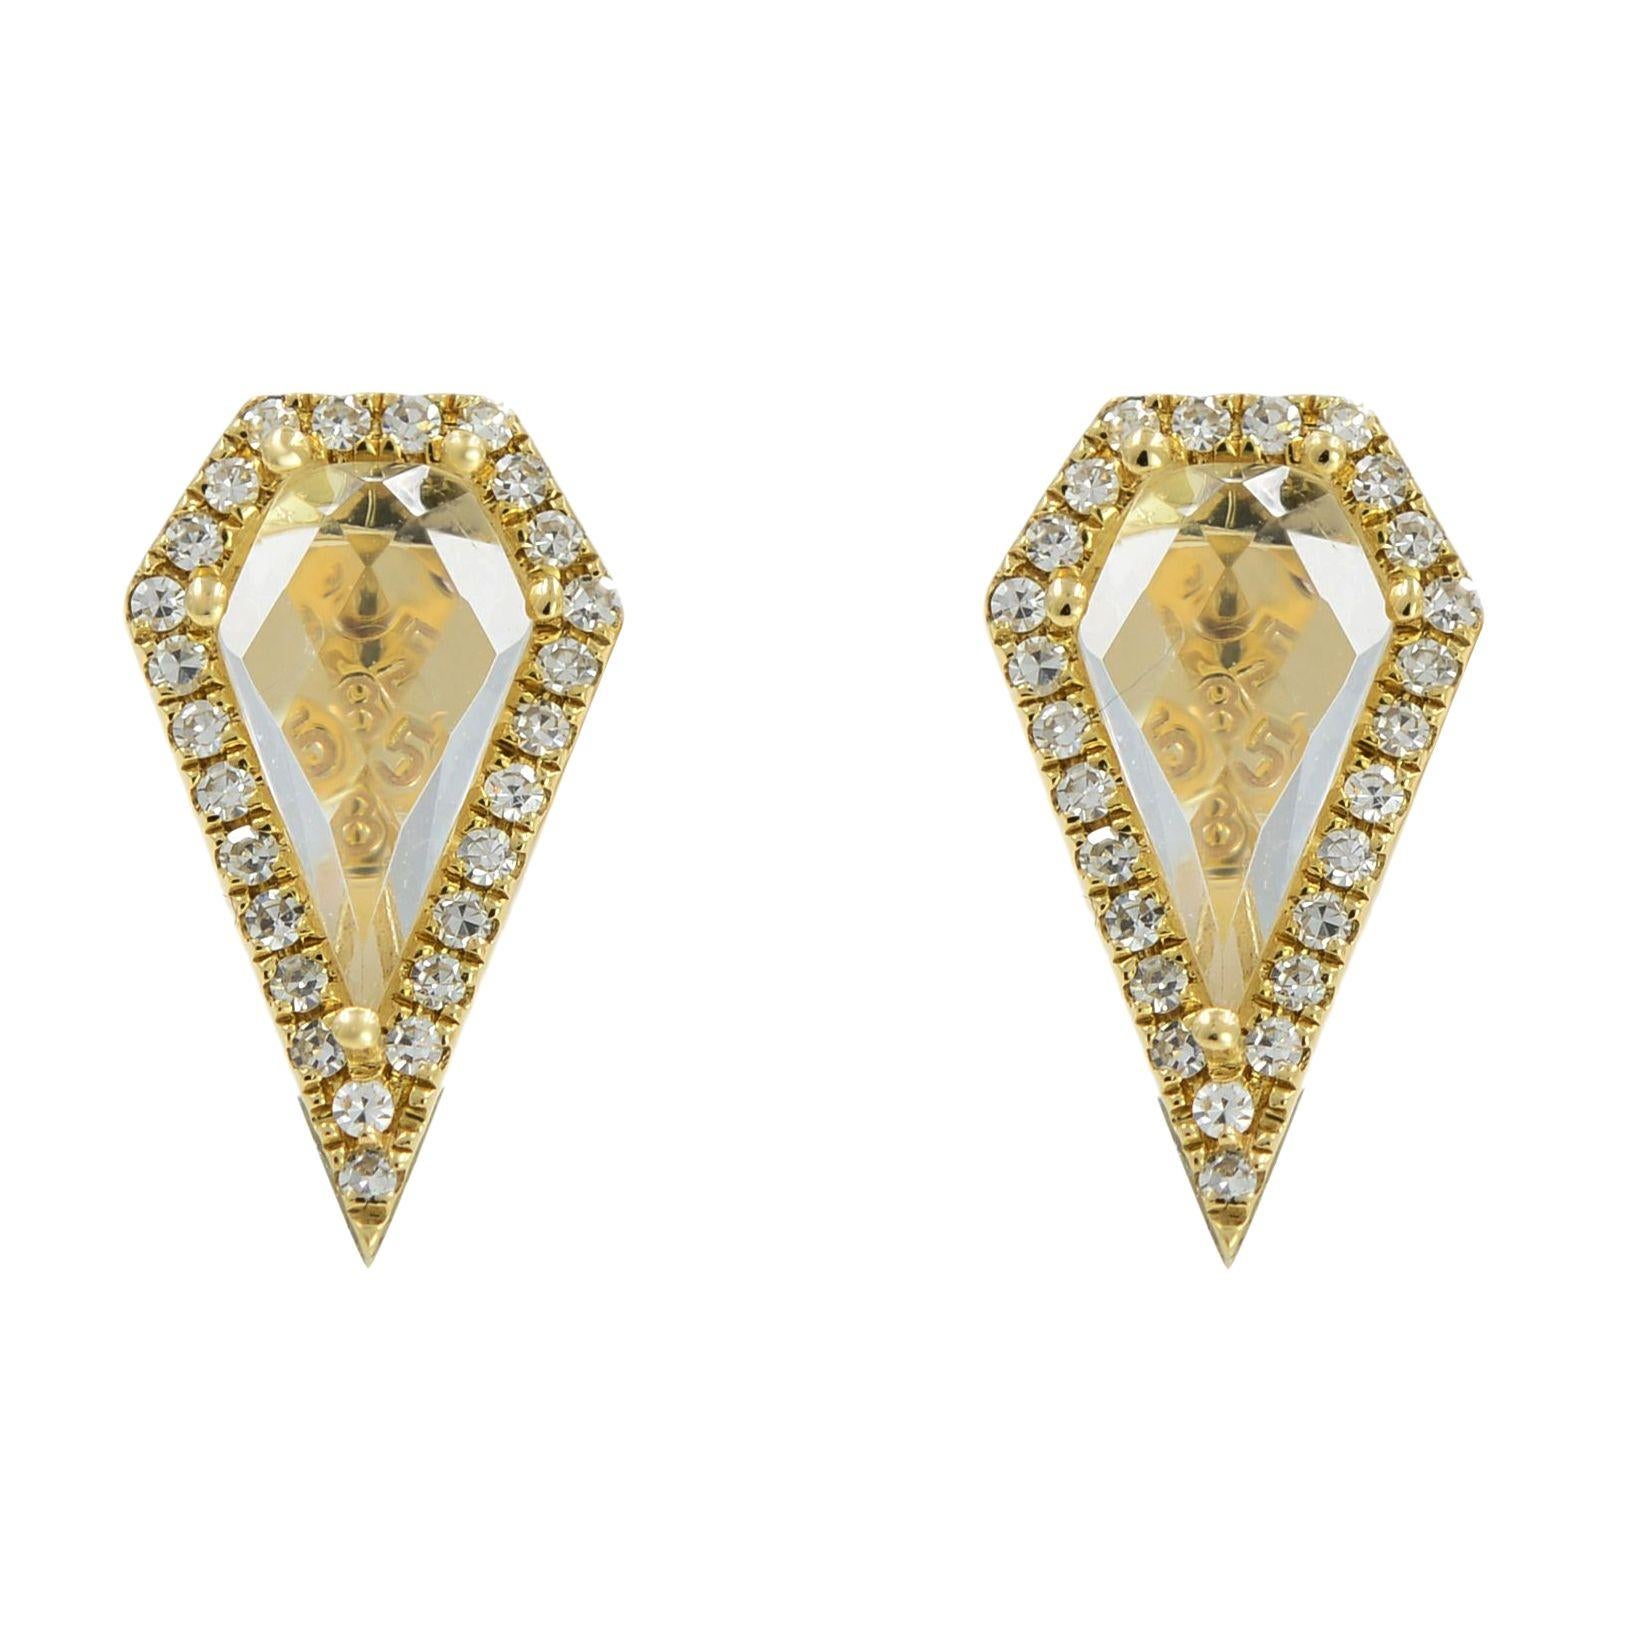 Pave Diamond 0.12cttw and White Topaz 1.20cttw Earrings 14K Yellow Gold In New Condition For Sale In New York, NY